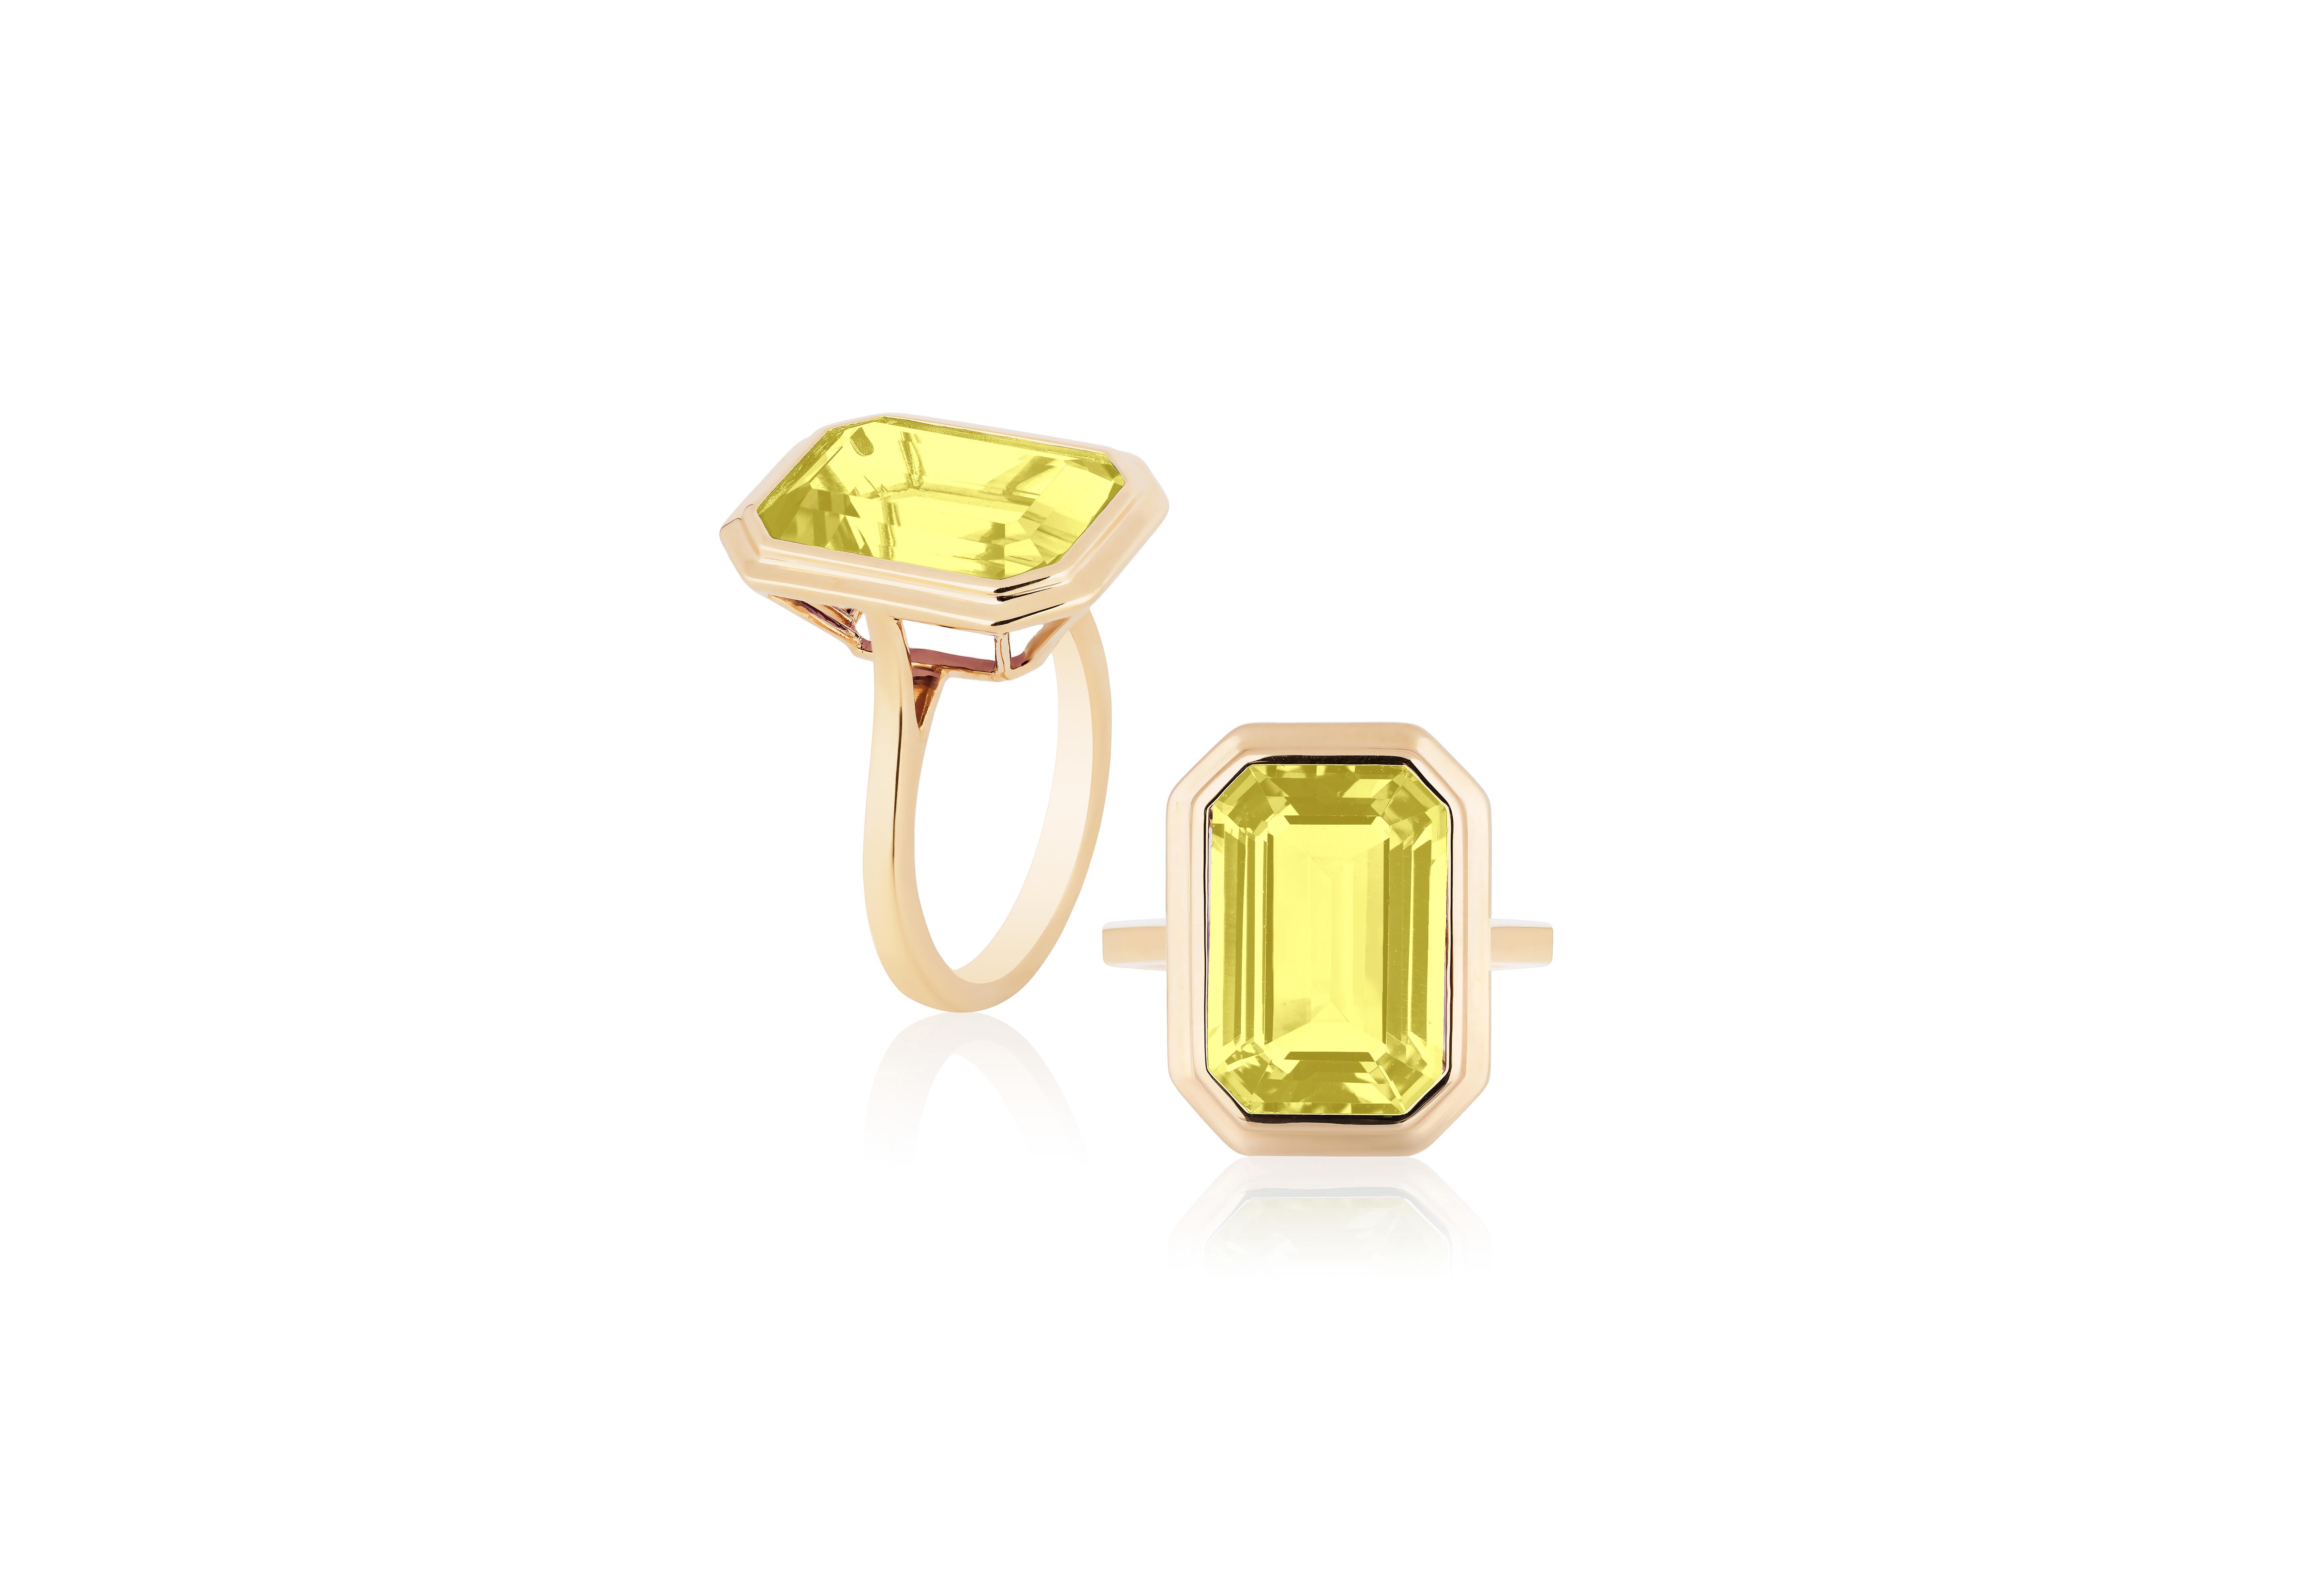 A classic yet an everyday bold statement piece, this amazing cocktail ring is part of our very new ‘Manhattan’ Collection. It has a 10 x 15 mm emerald cut Lemon Quartz in a bezel setting in 18k gold   ​

Minimalist lines yet bold structures is what